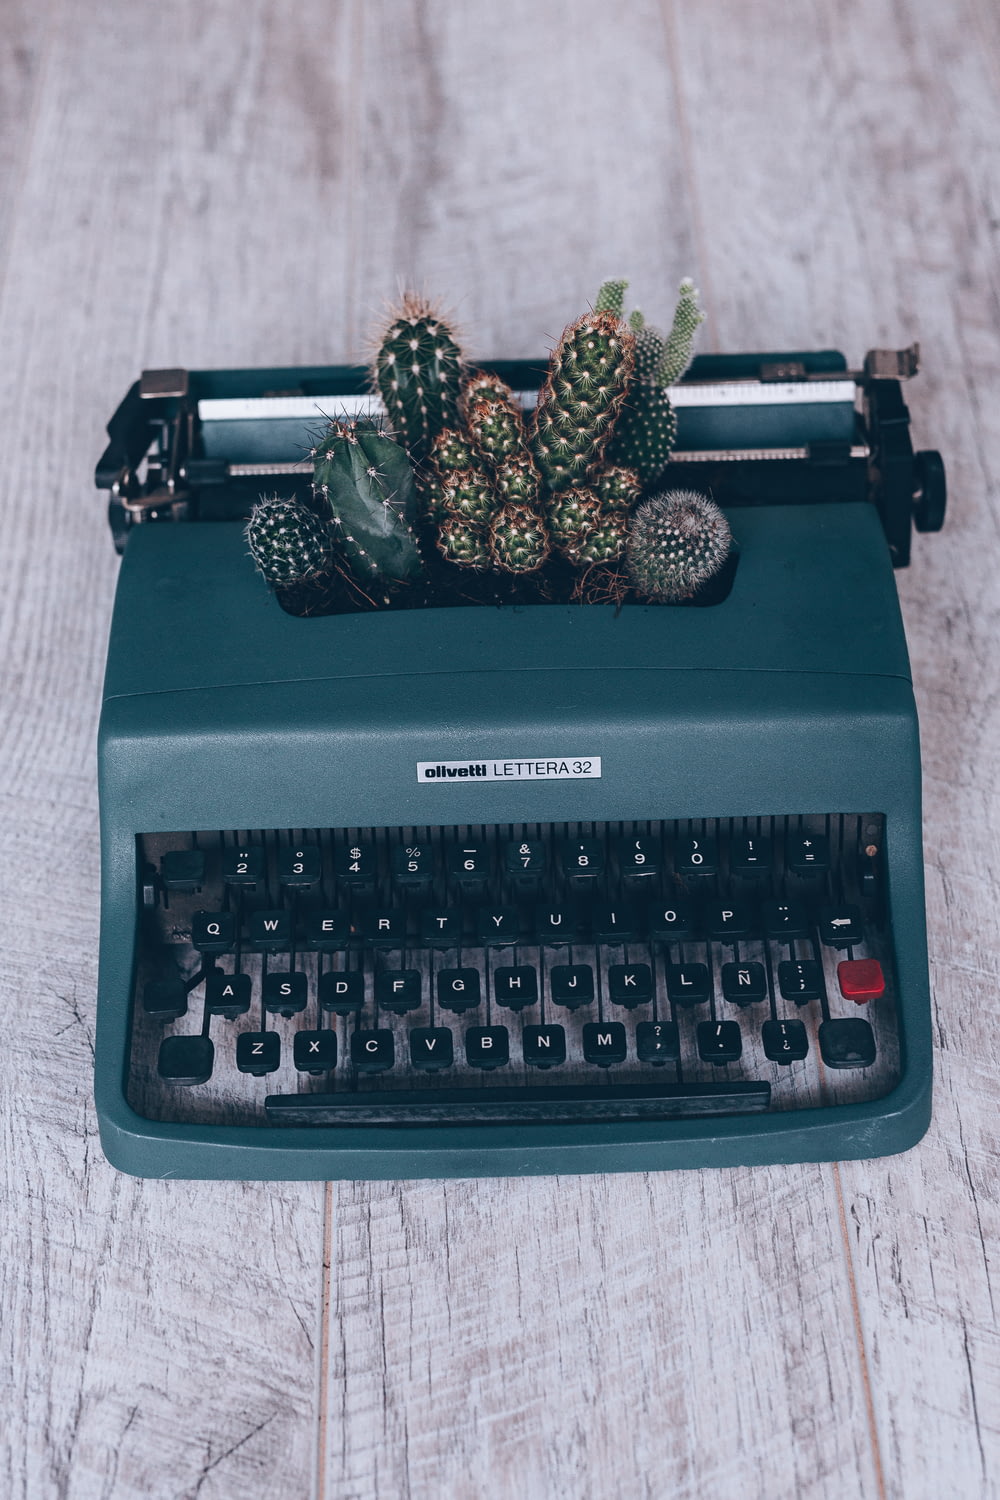 black and green Olympia typewriter and green cactus plant